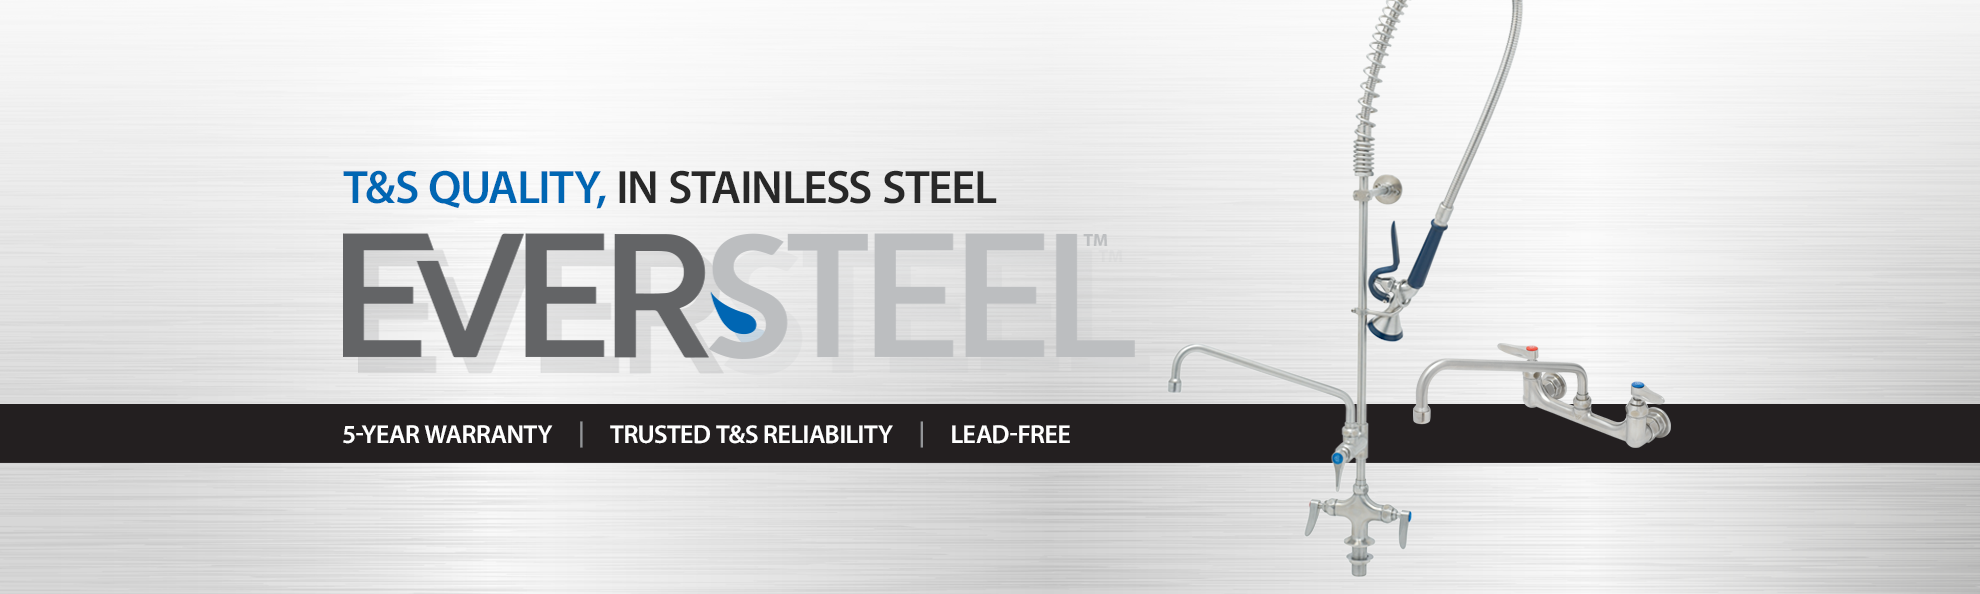 EverSteel - T&S Quality In Stainless Steel